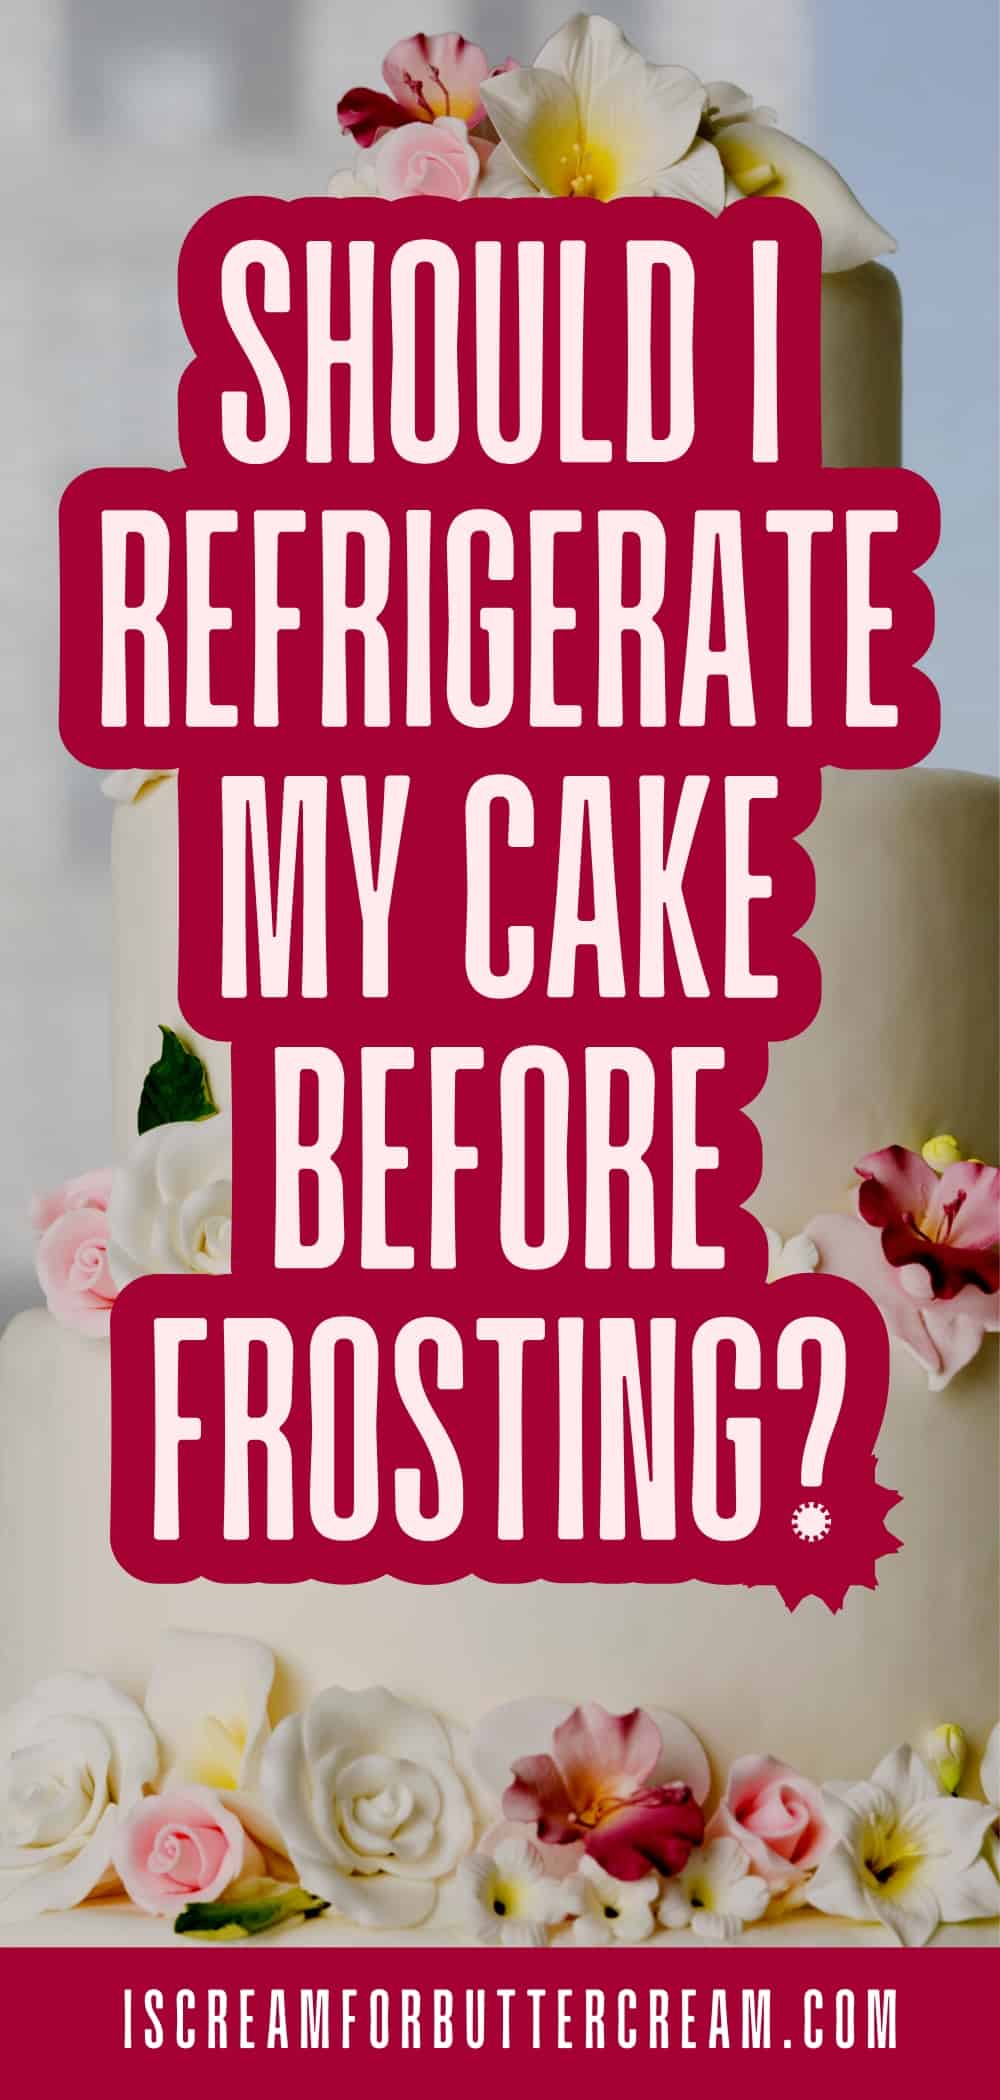 Wedding cake with flowers in the background with text overlay that says should I refrigerate my cake before frosting.